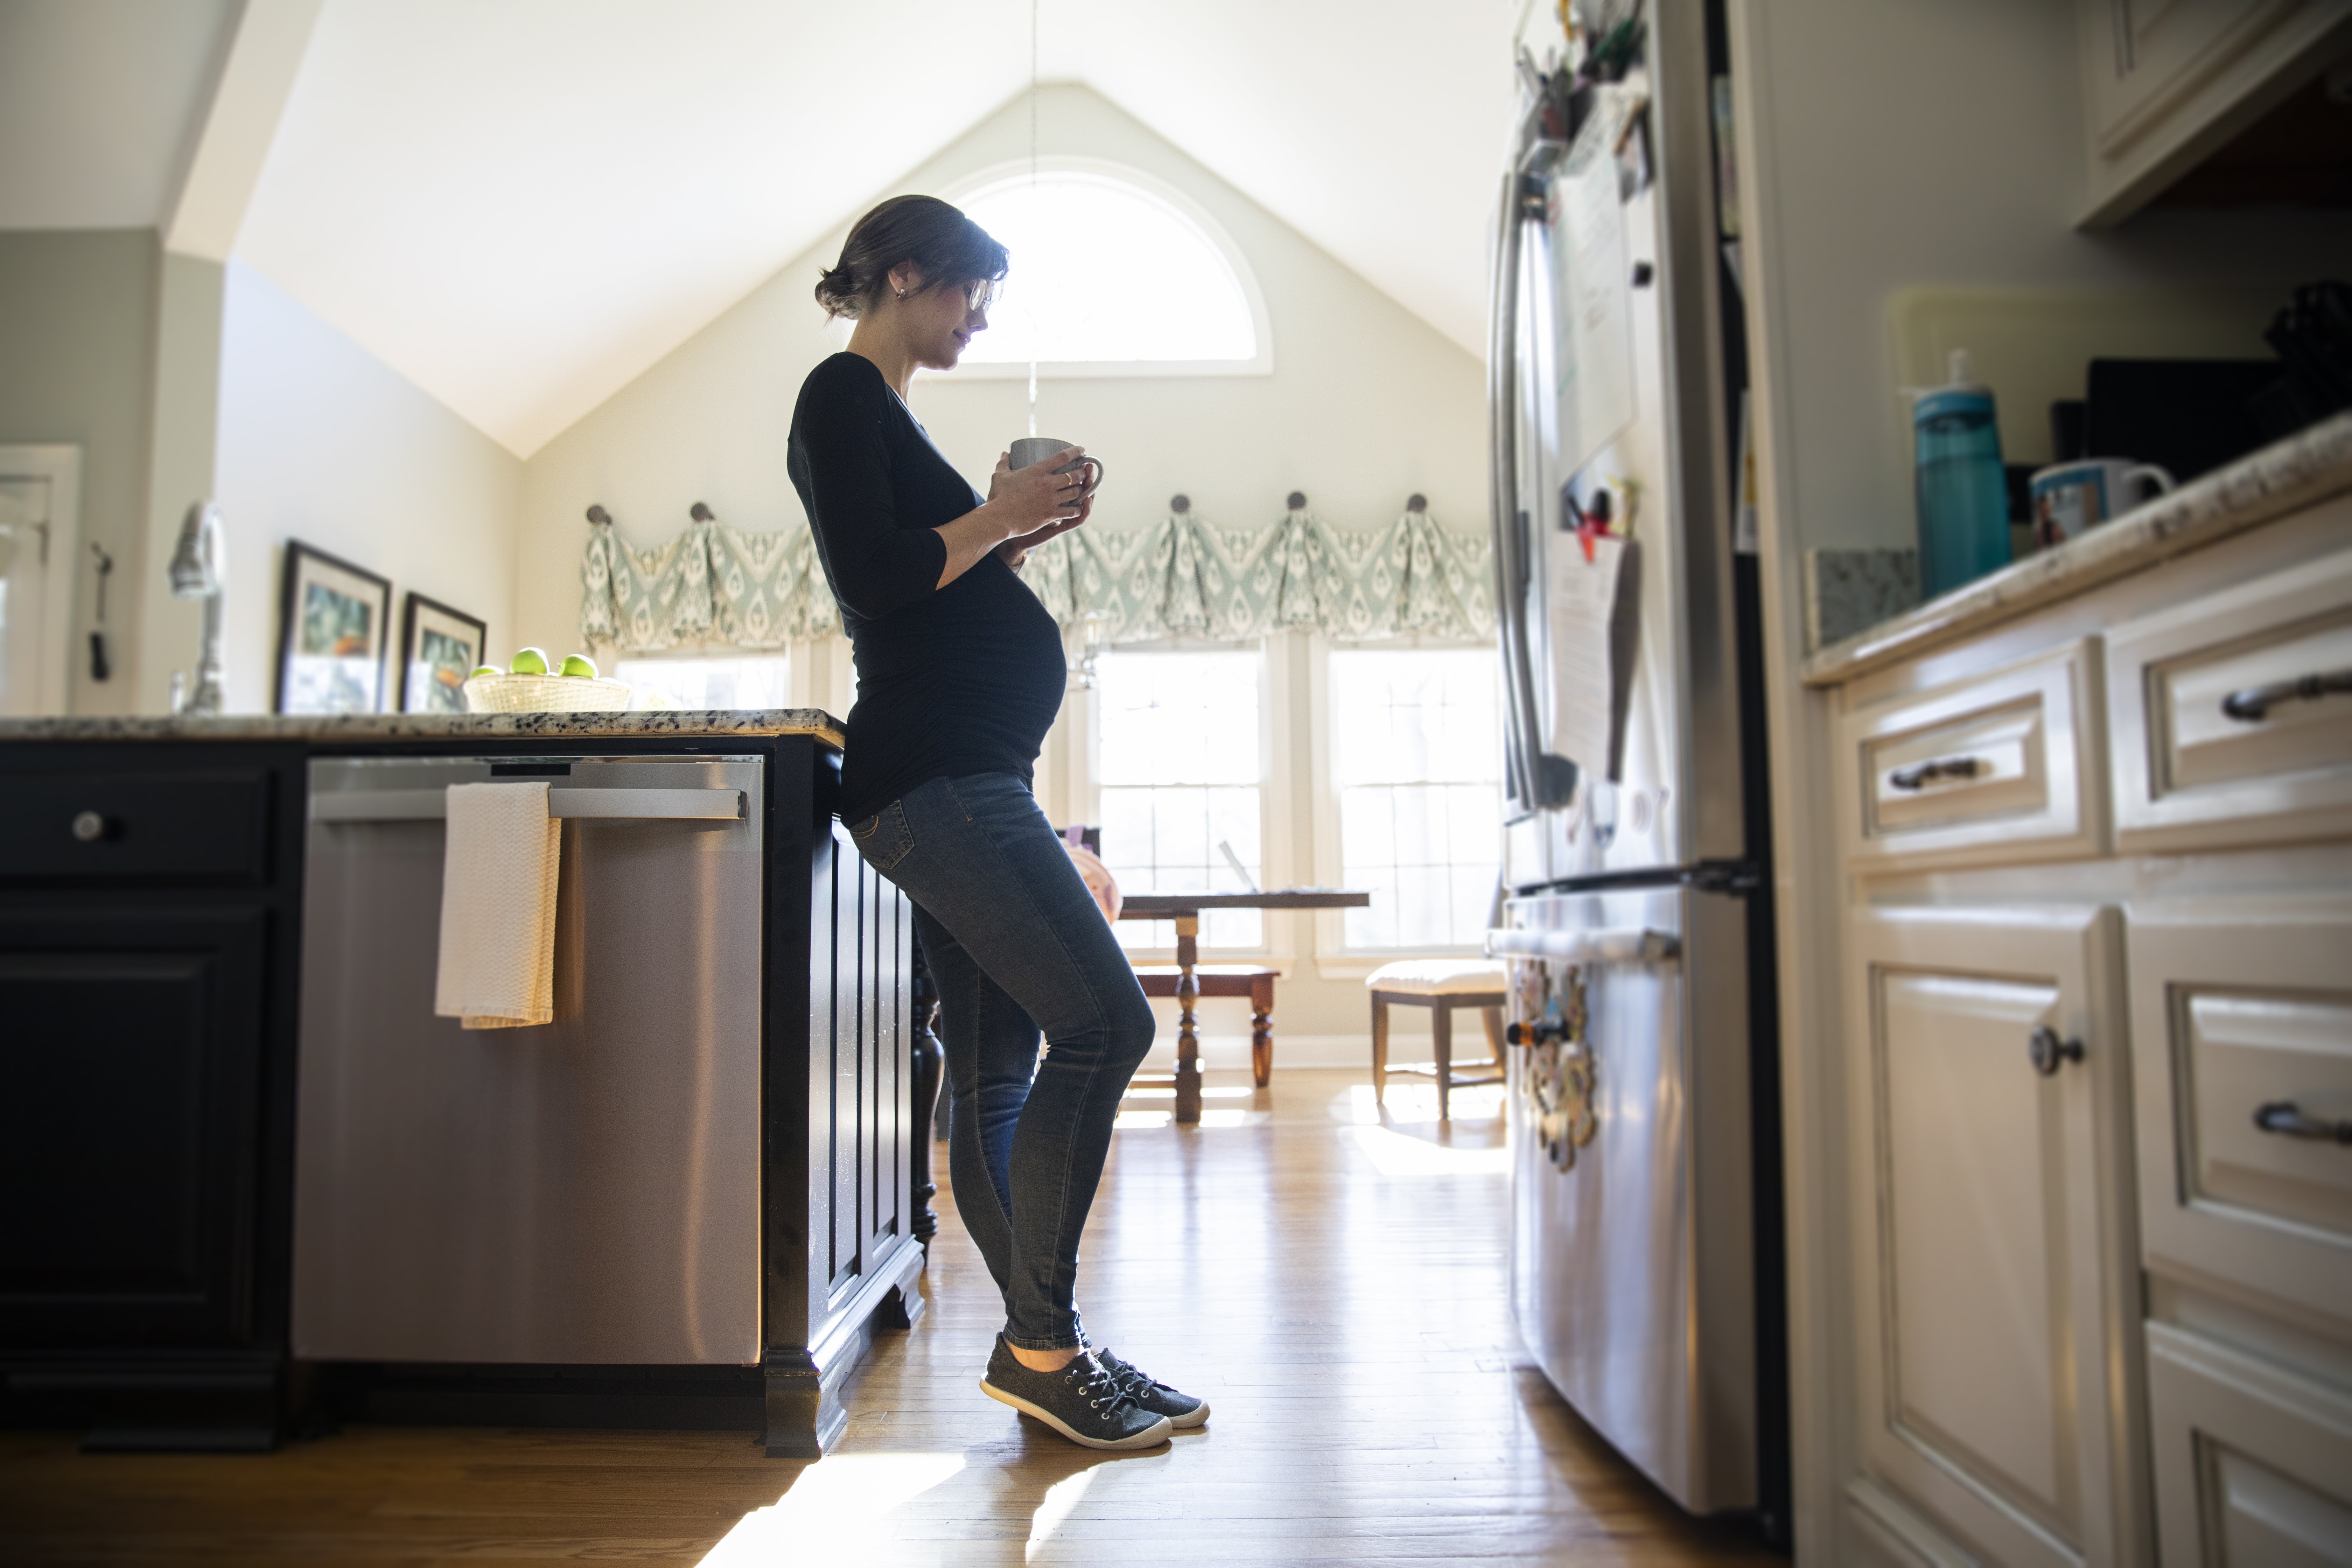 A pregnant woman. | Source: Getty Images